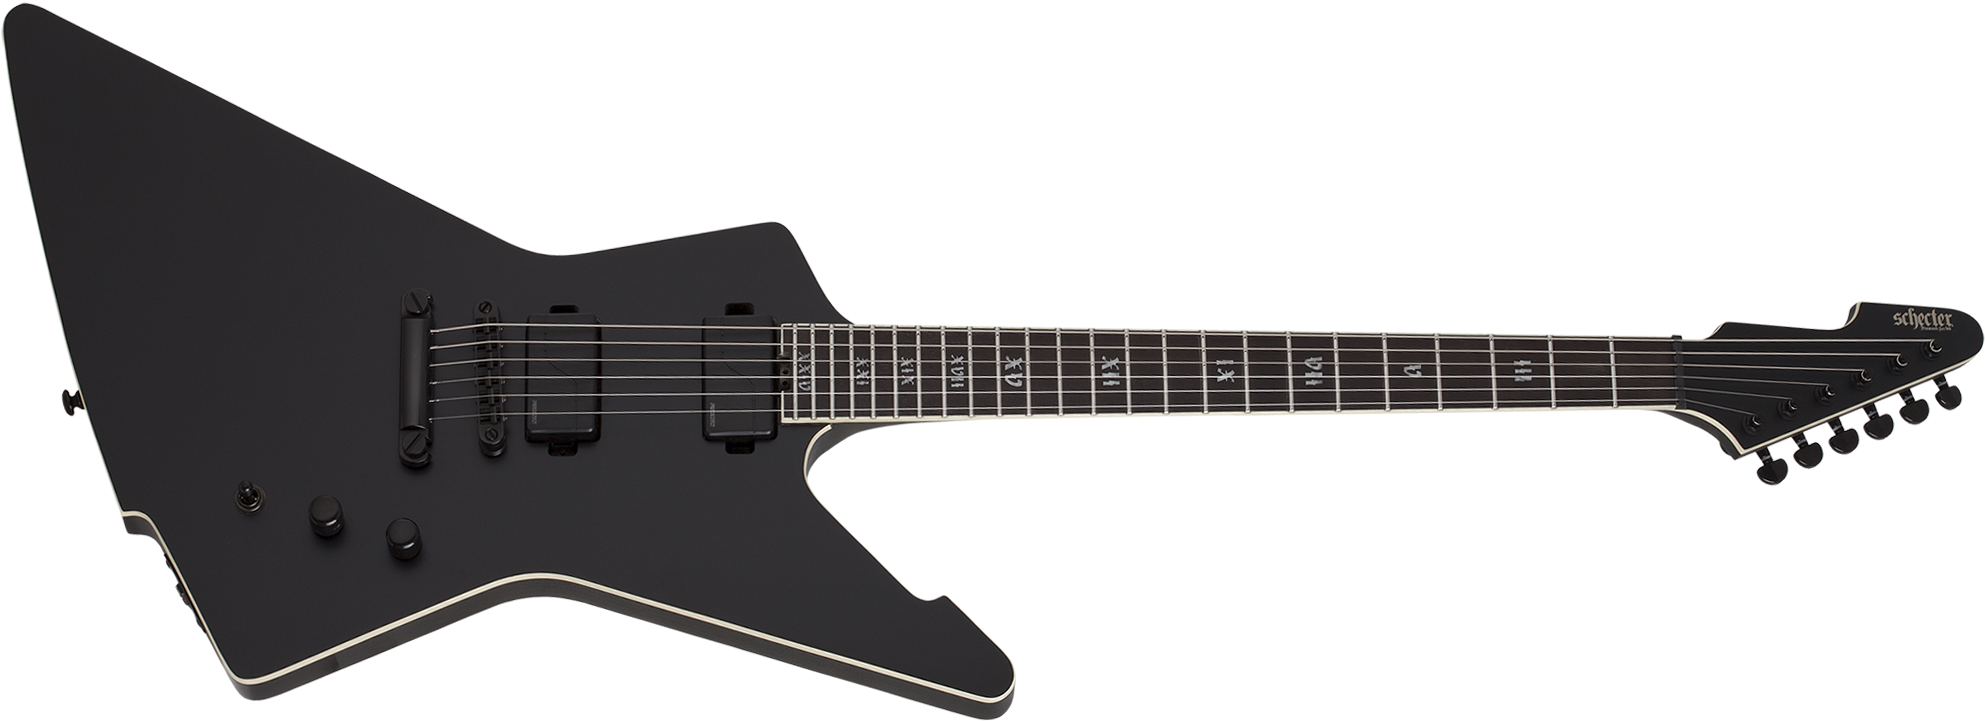 E-1 Sls Evil Twin - Schecter 7 String Guitar (2000x750), Png Download